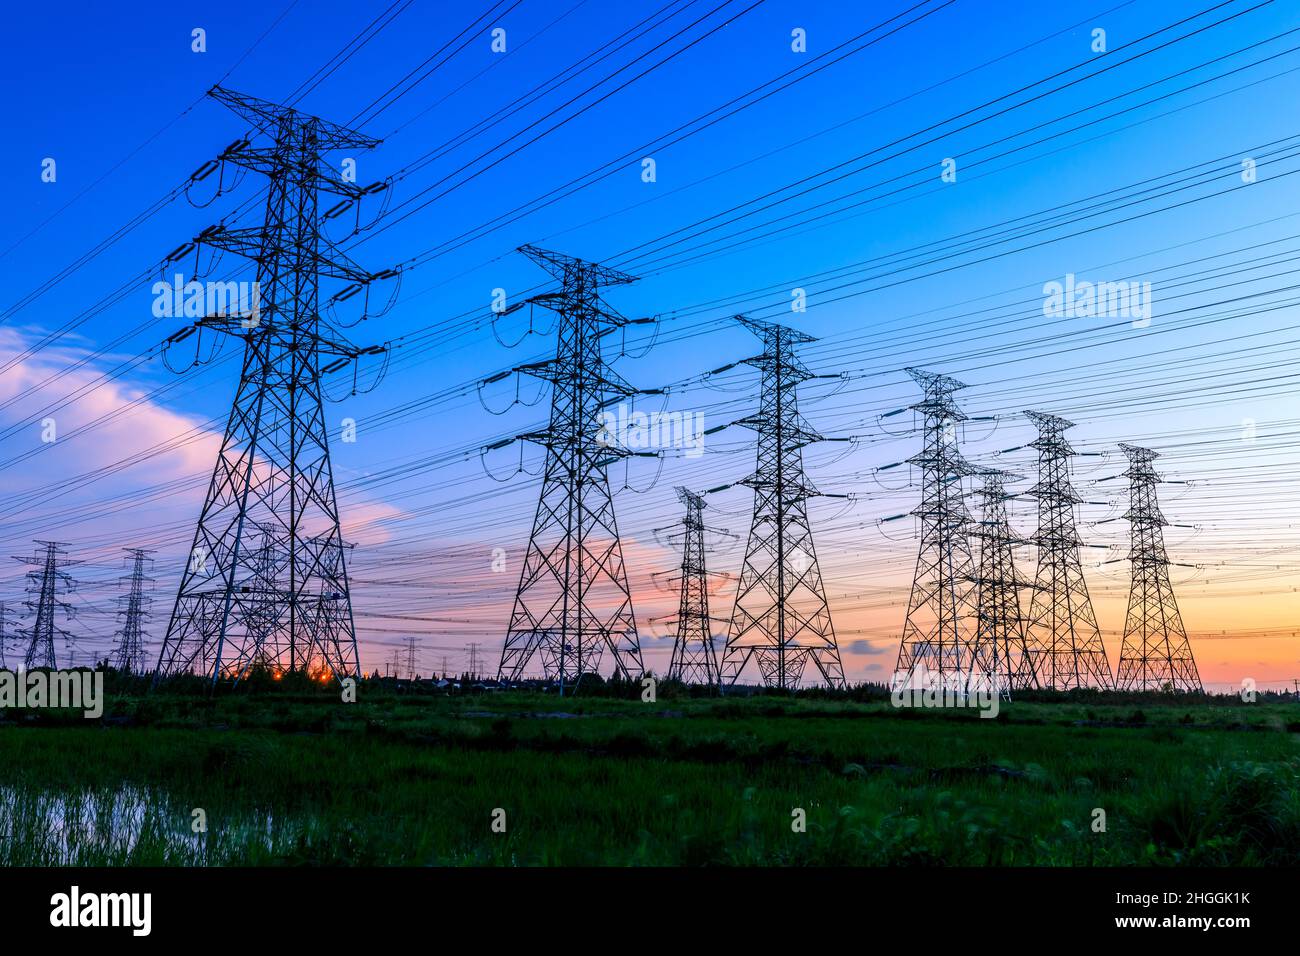 High voltage power tower industrial landscape at sunrise,urban power transmission lines. Stock Photo